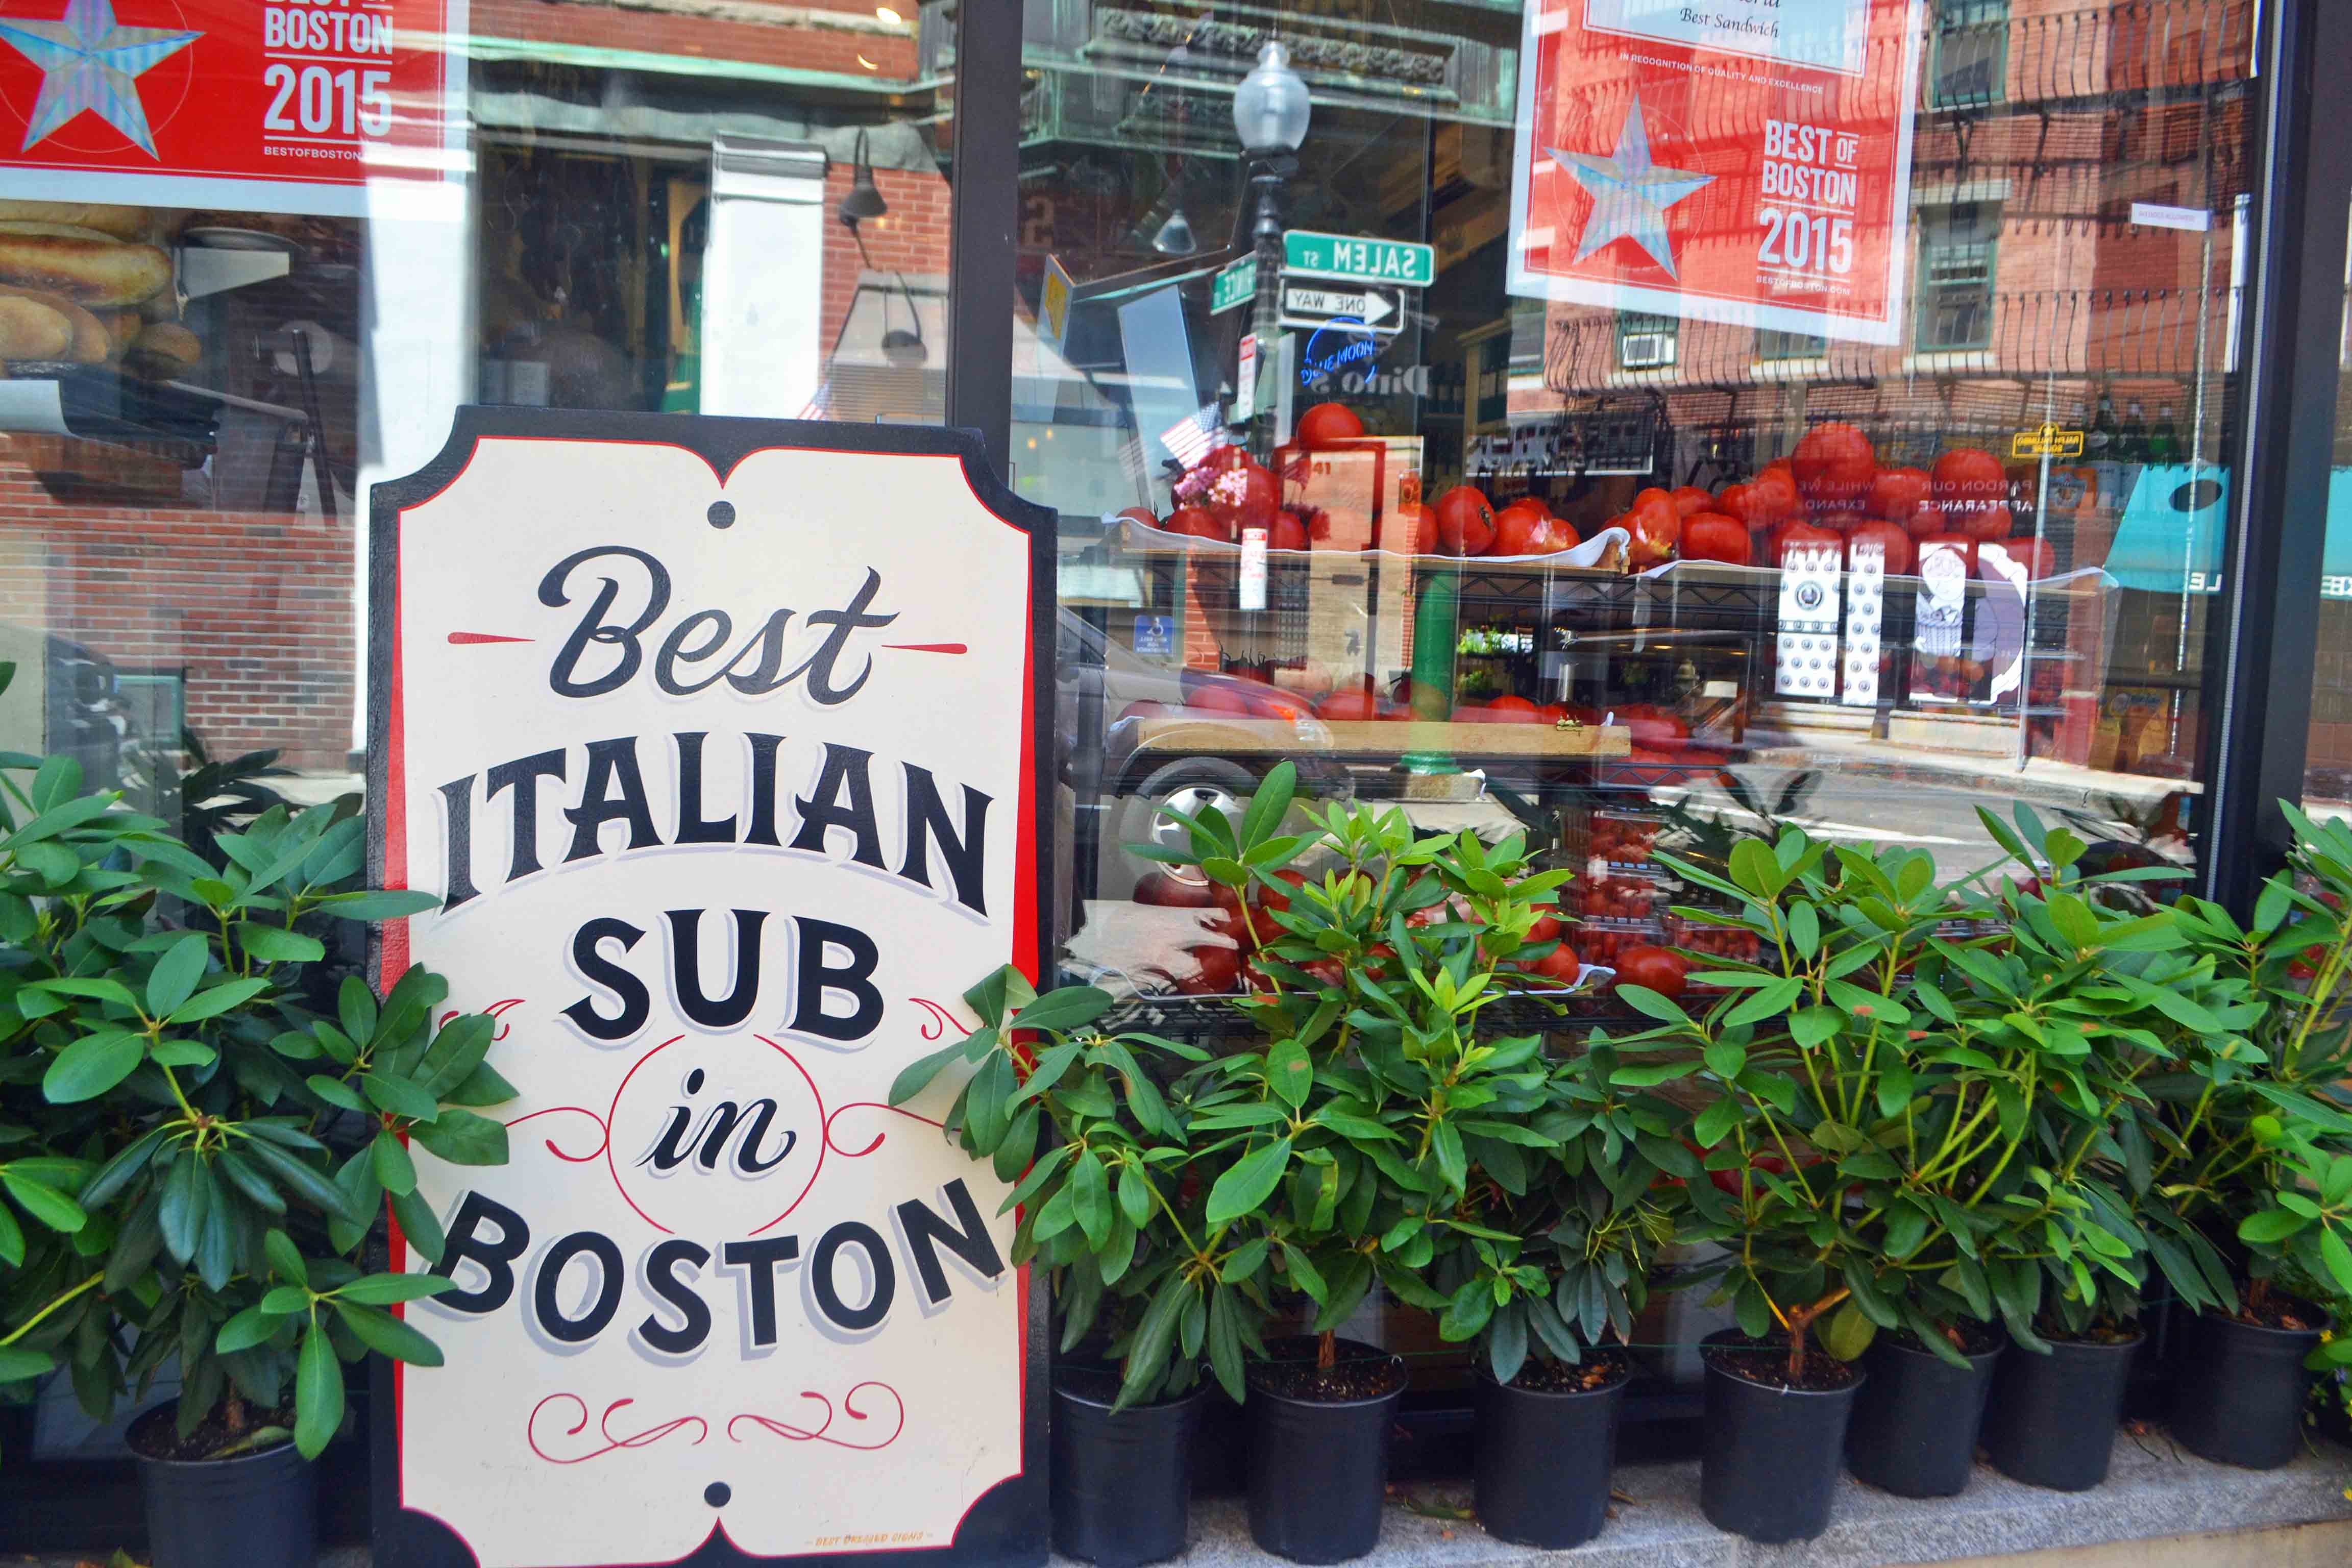 Best Italian Subs in Boston. Best Places to Eat and See in Boston. A list of the best things to do and best places to eat while traveling to Boston. Weather in Boston, transportation in Boston, and entertainment and food in Boston. www.modernhoney.com